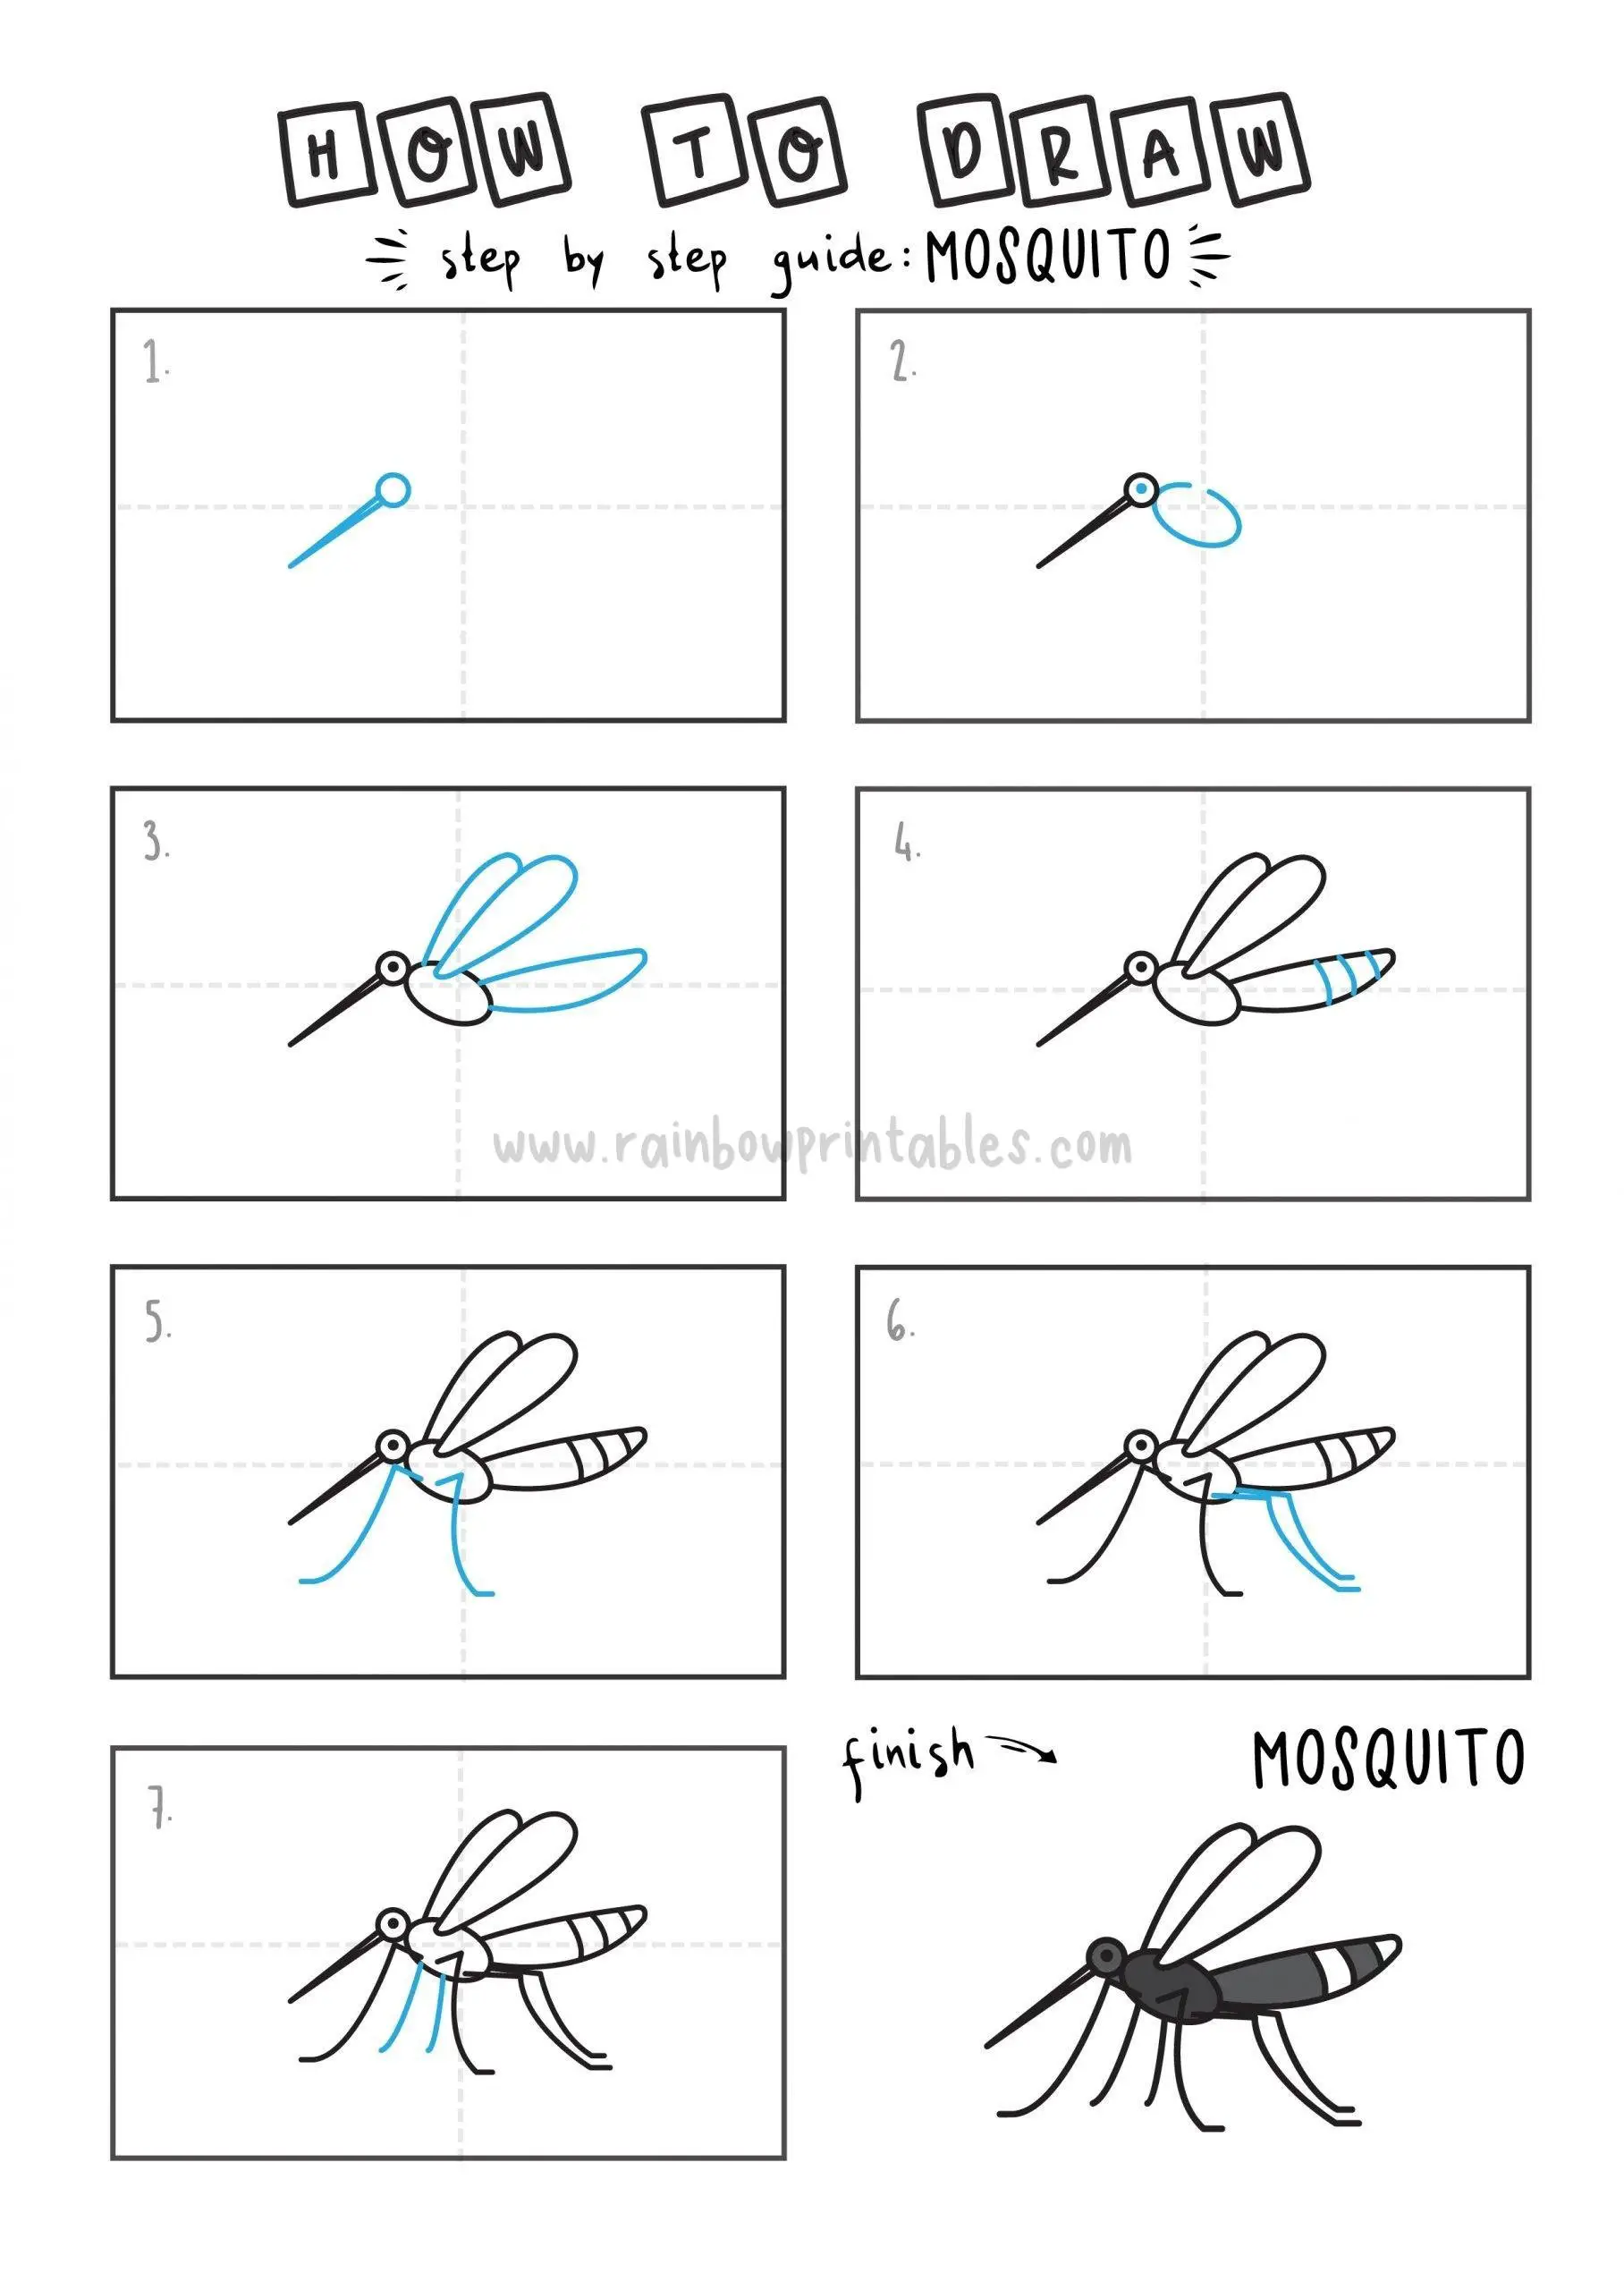 How To Draw Bug Inset Mosquito Step by Step Art Drawing Tutorial for Young Children